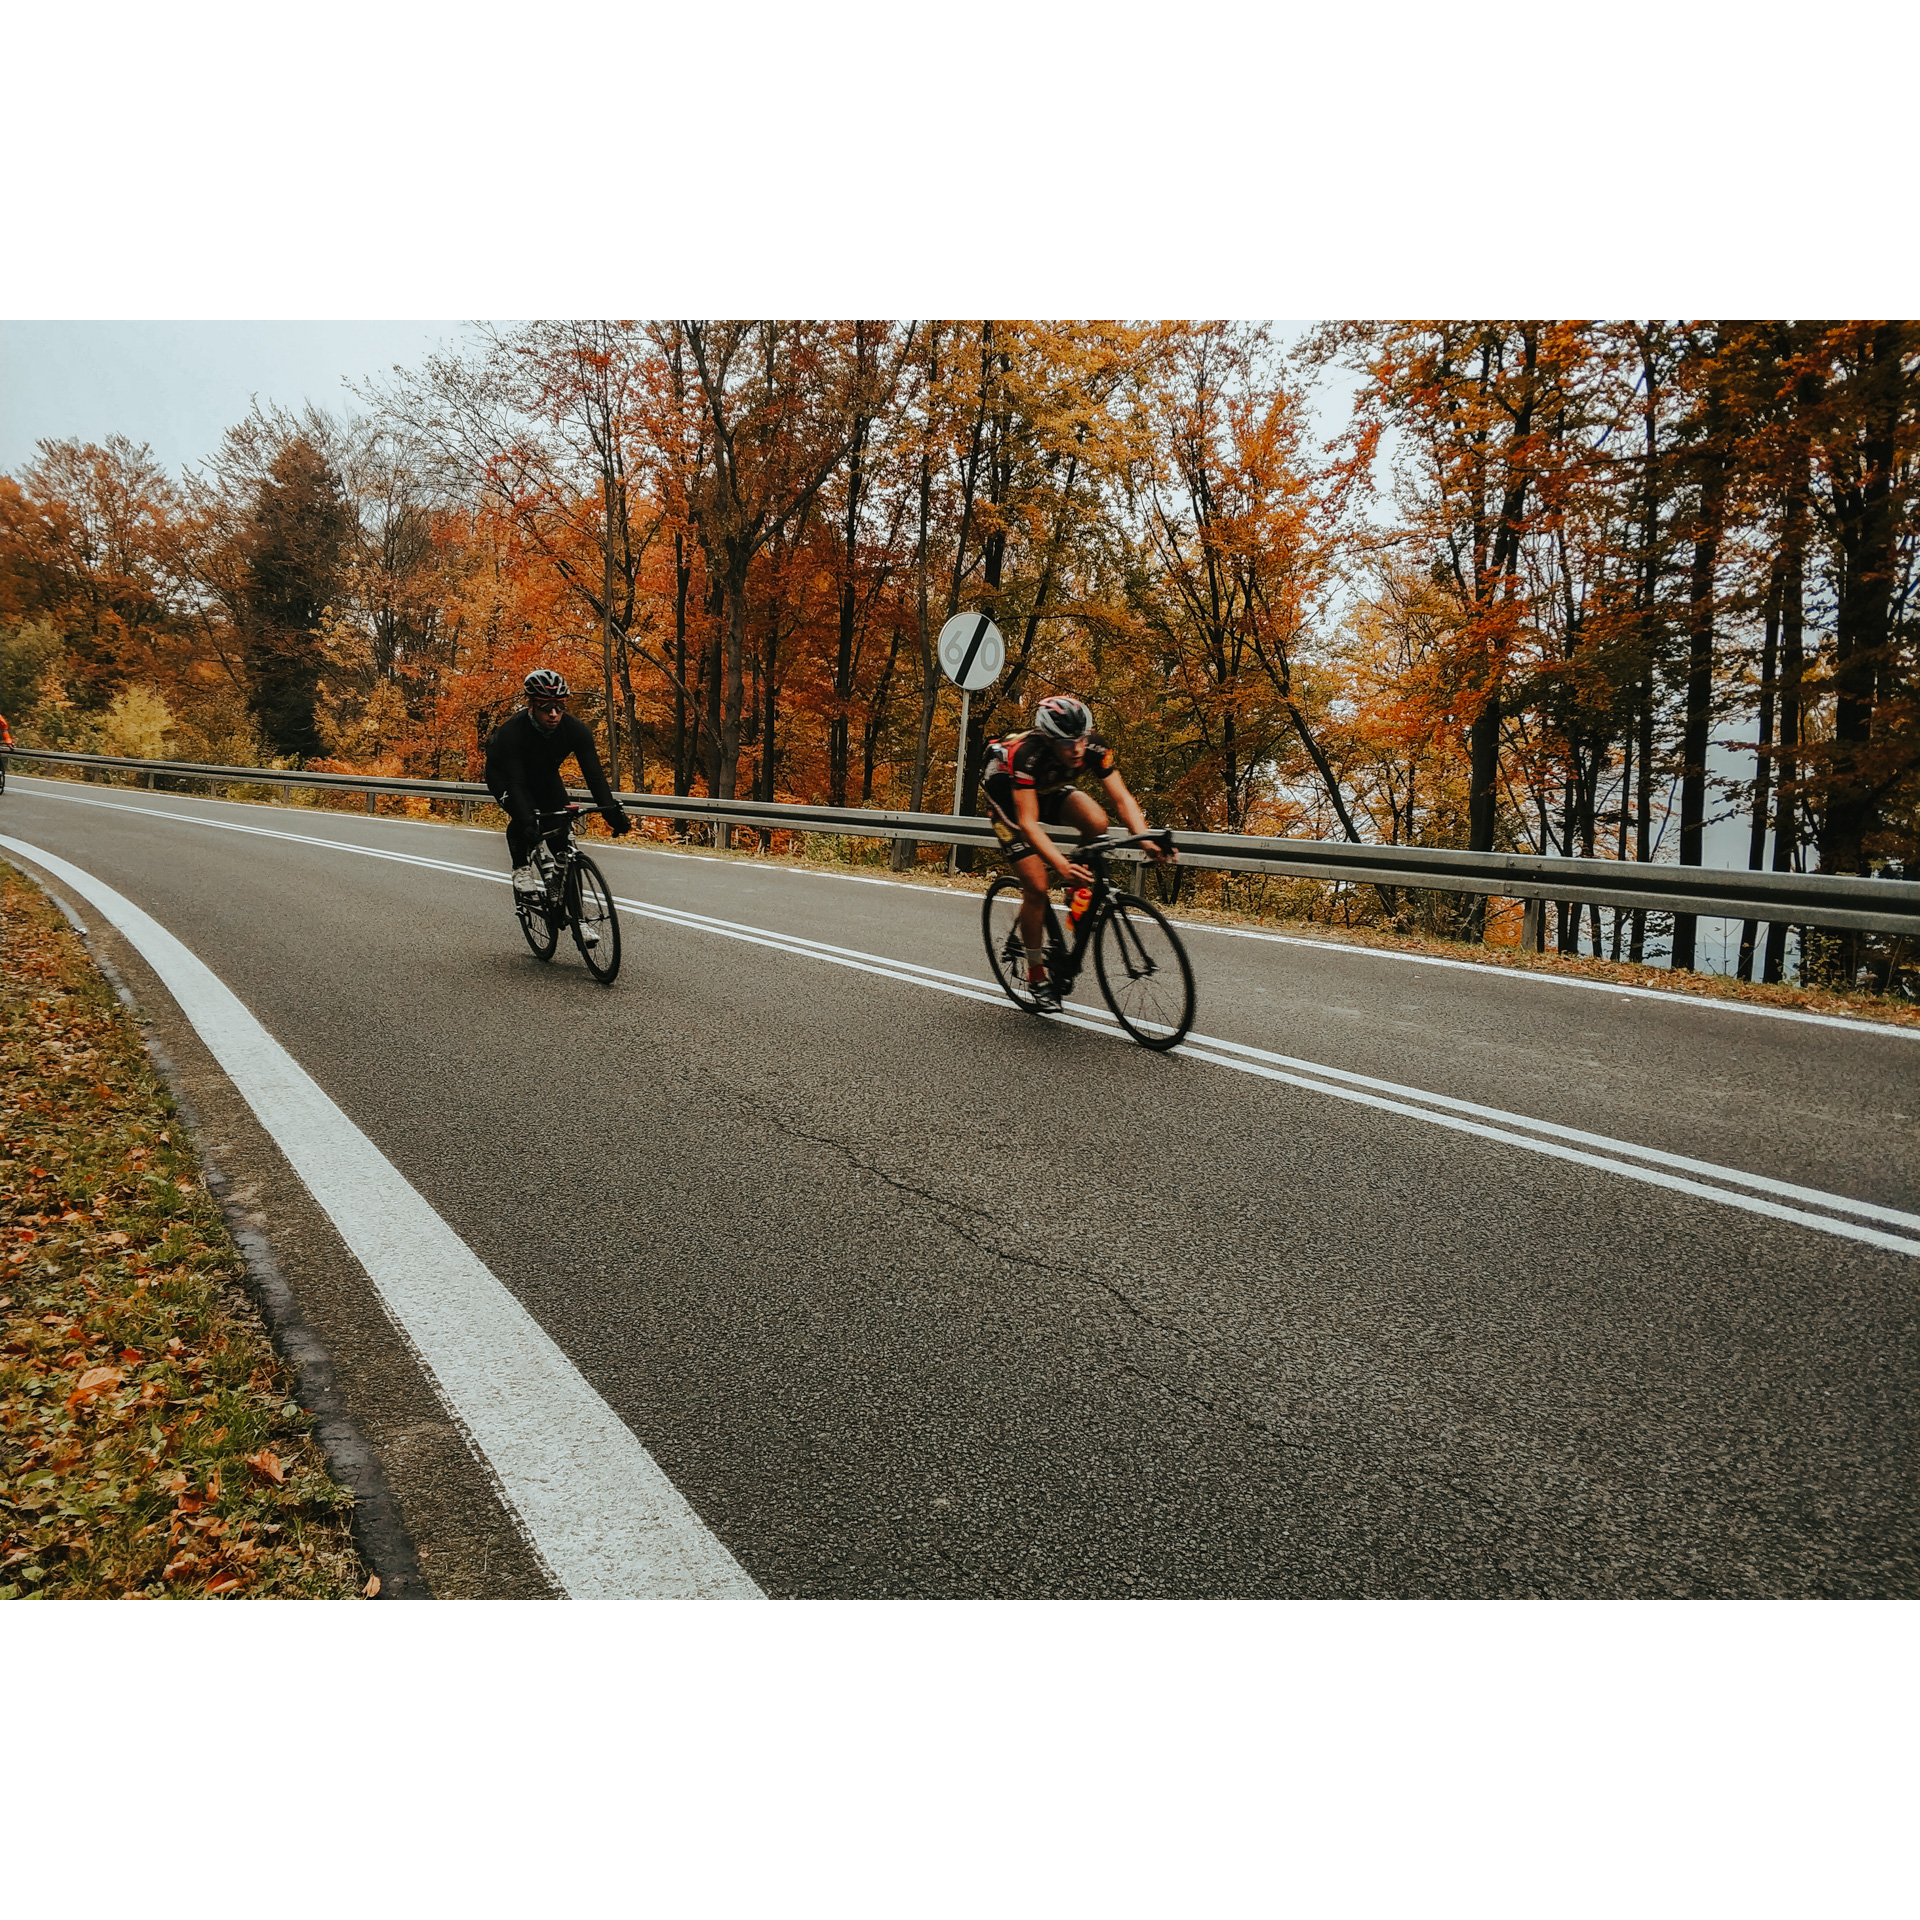 Cyclists in black clothes riding on an asphalt road surrounded by trees with orange leaves